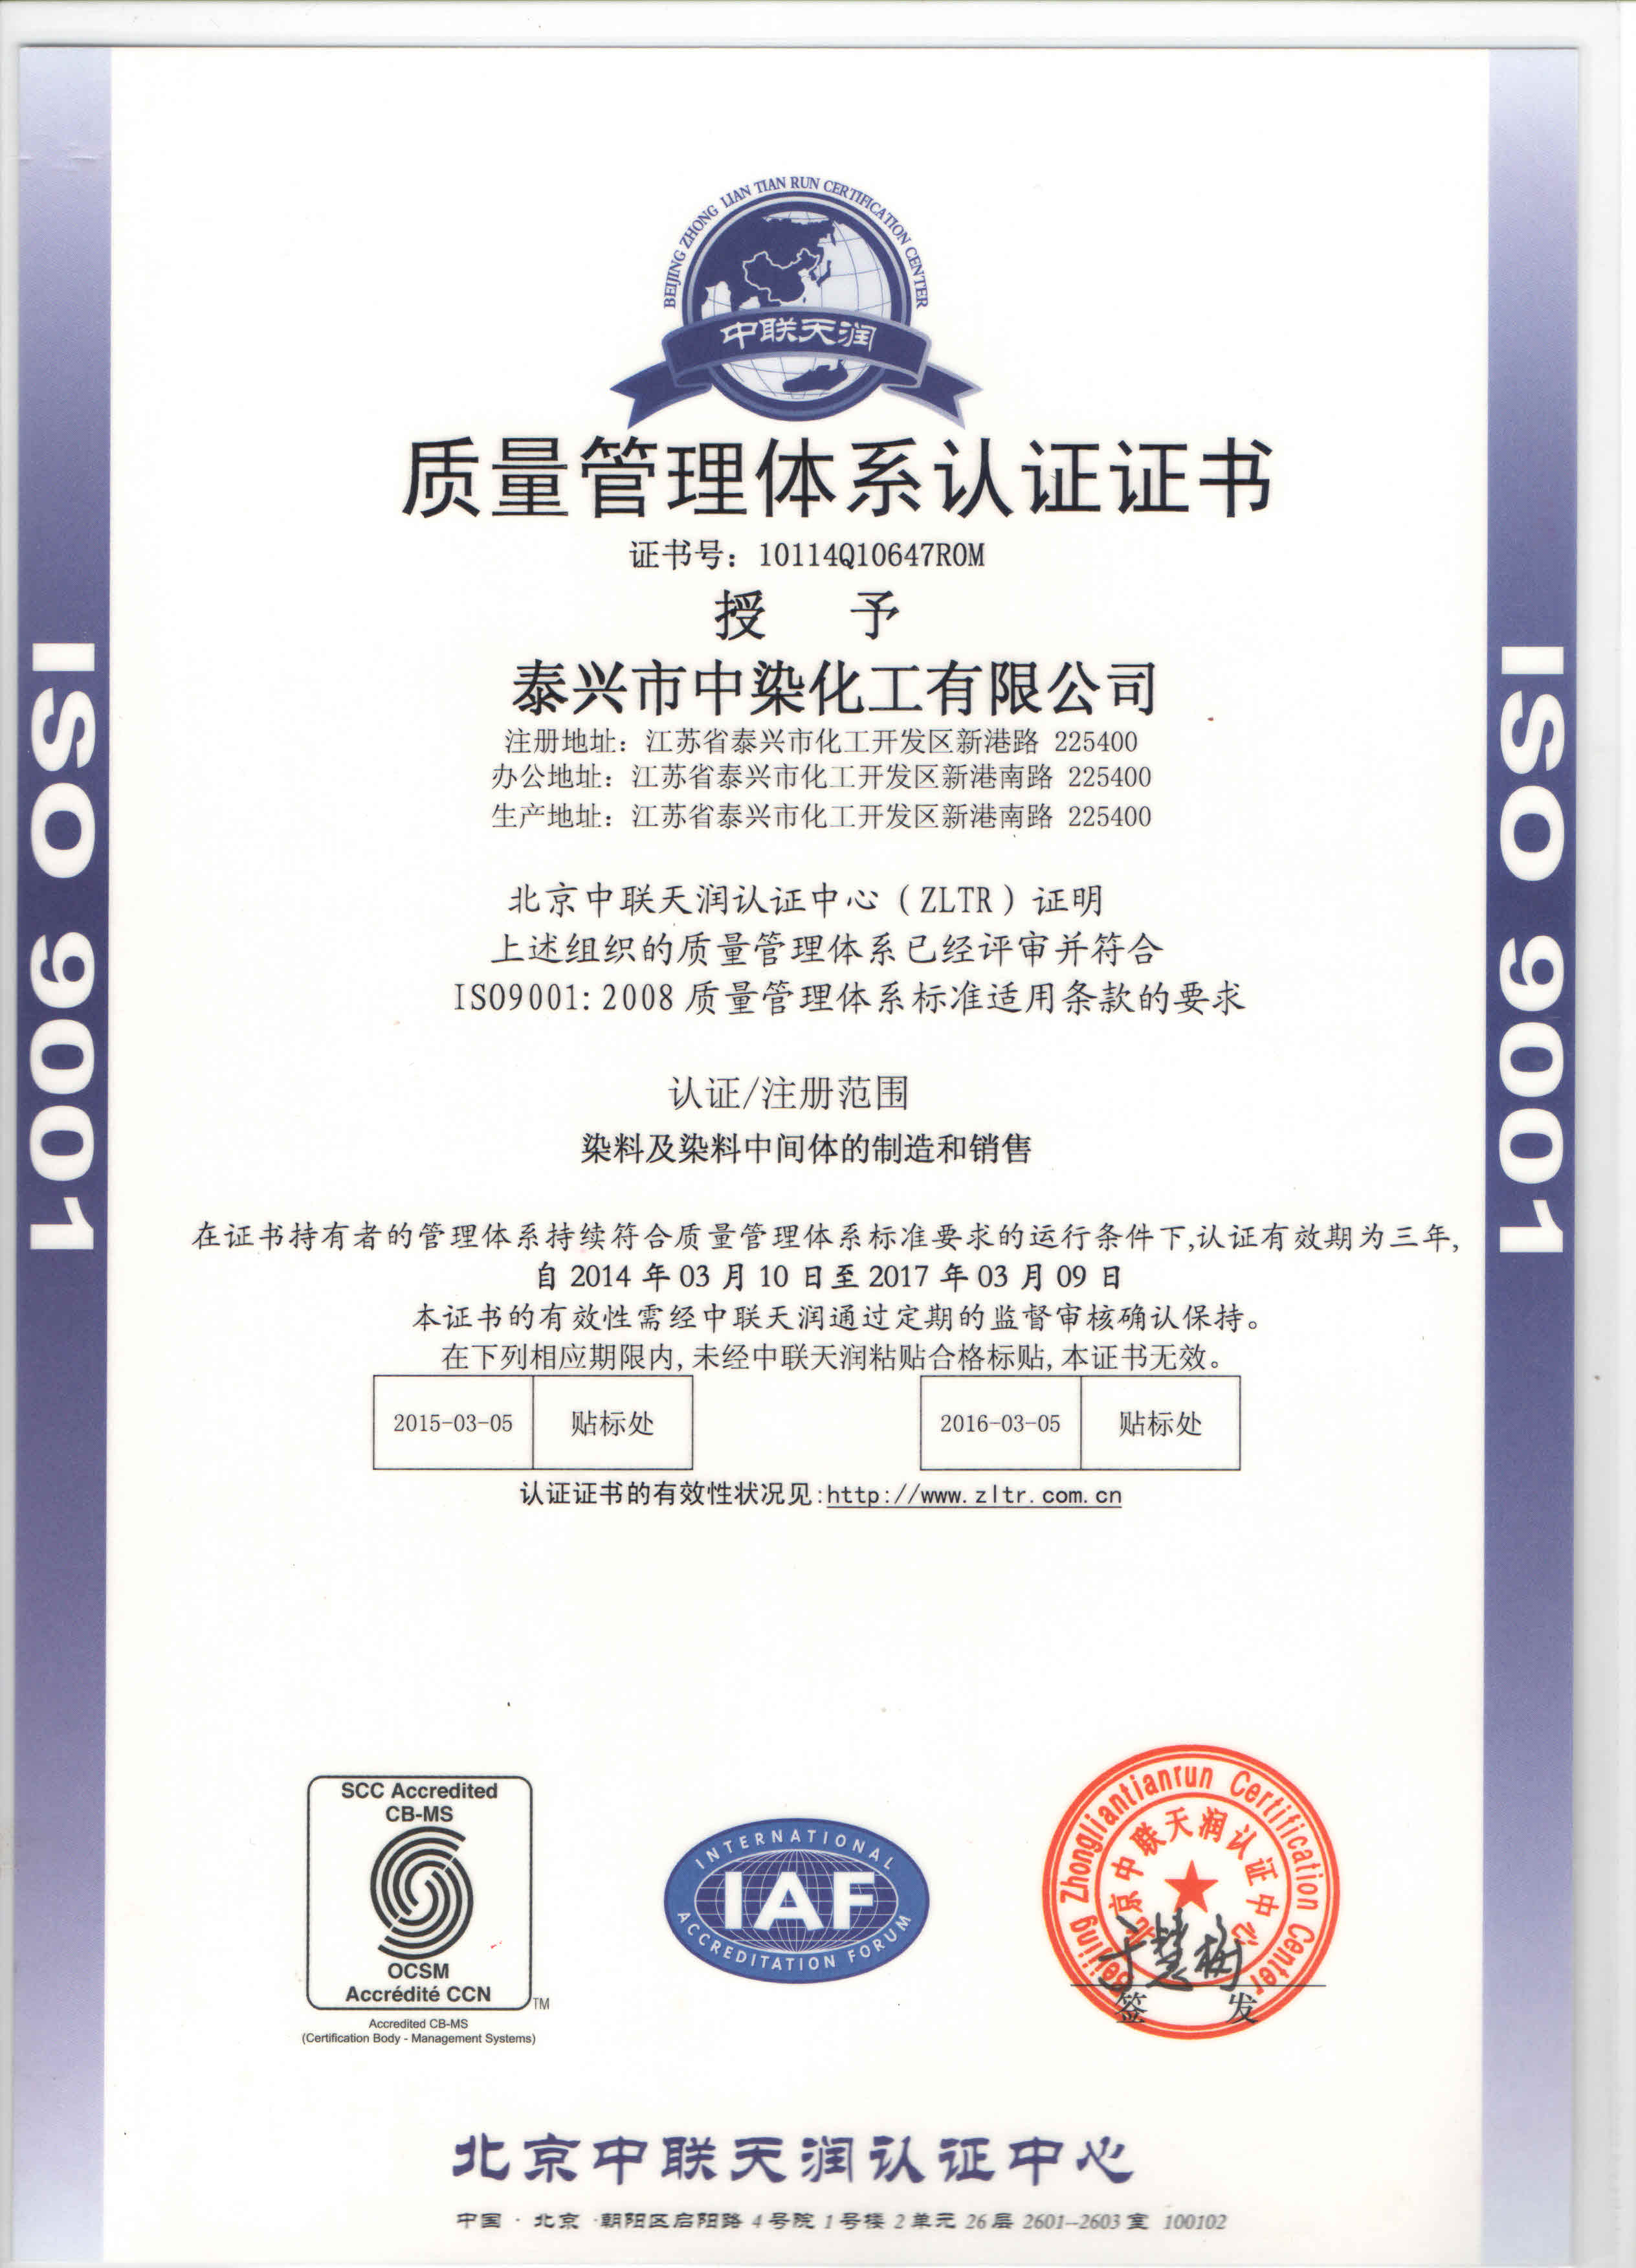 ISO9001:2008 Quality Management System Certification